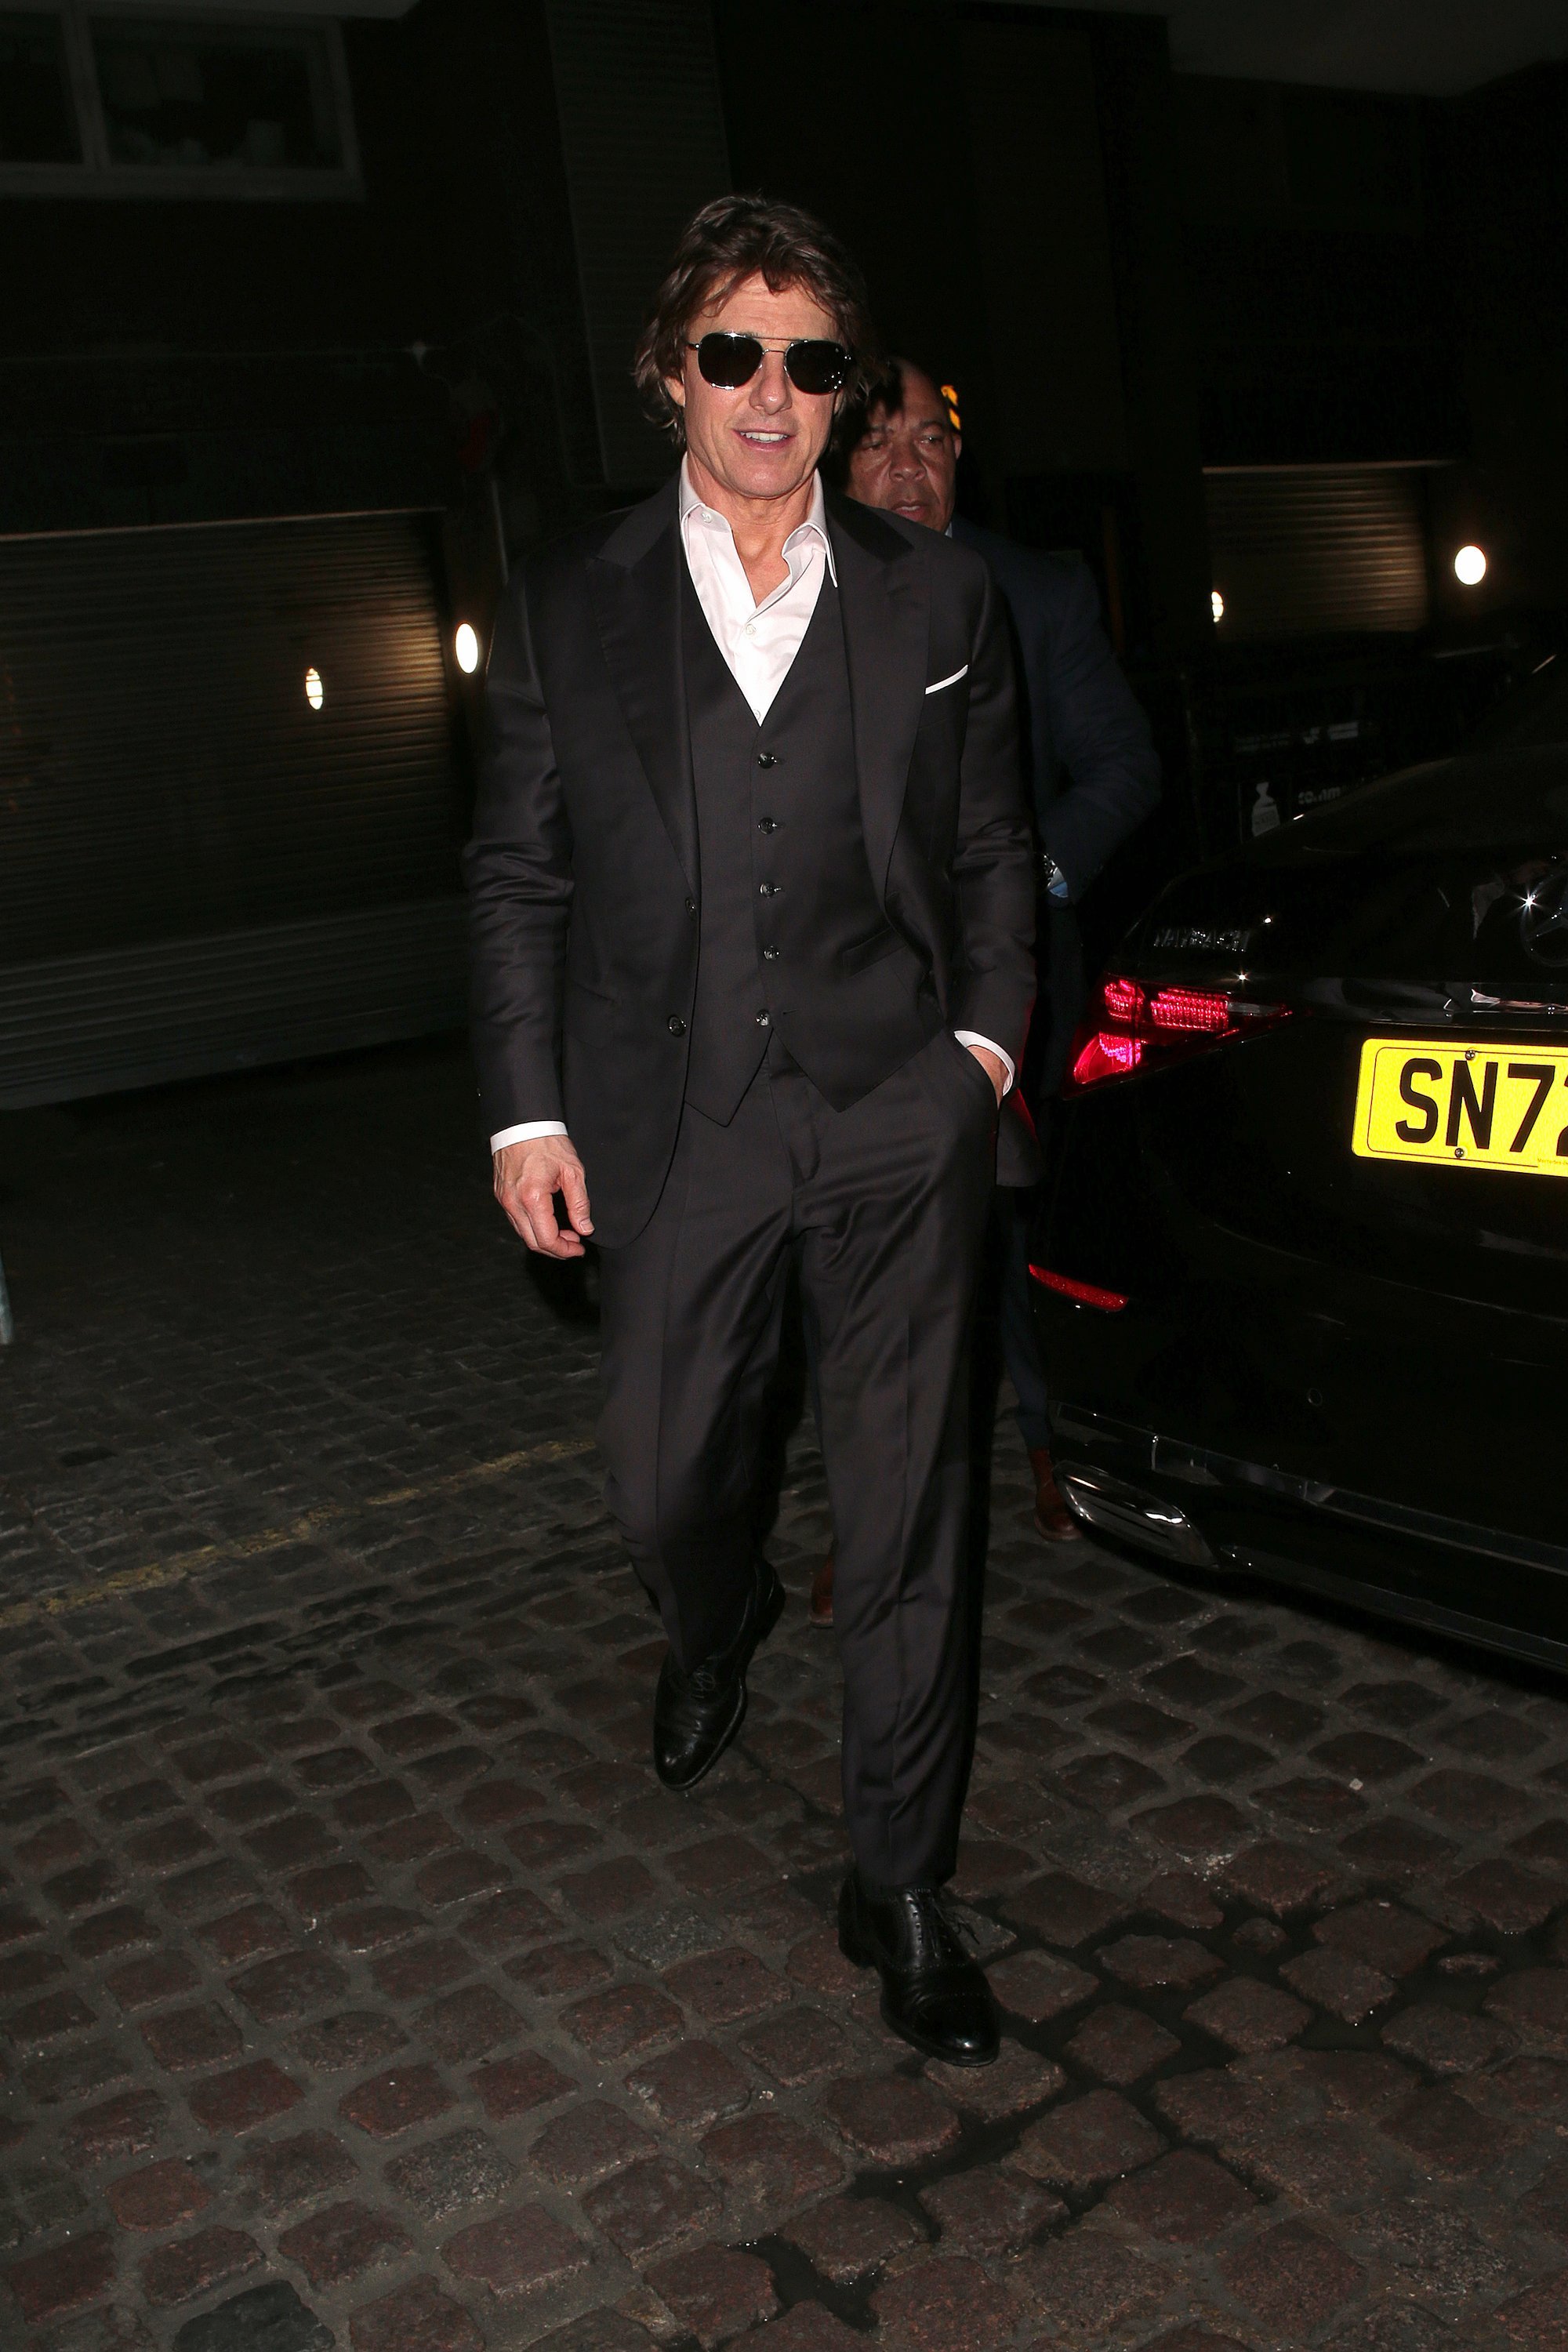 2023-06-22-Mission-Impossible-DR-P1-London-Premiere-After-Party-027.jpg